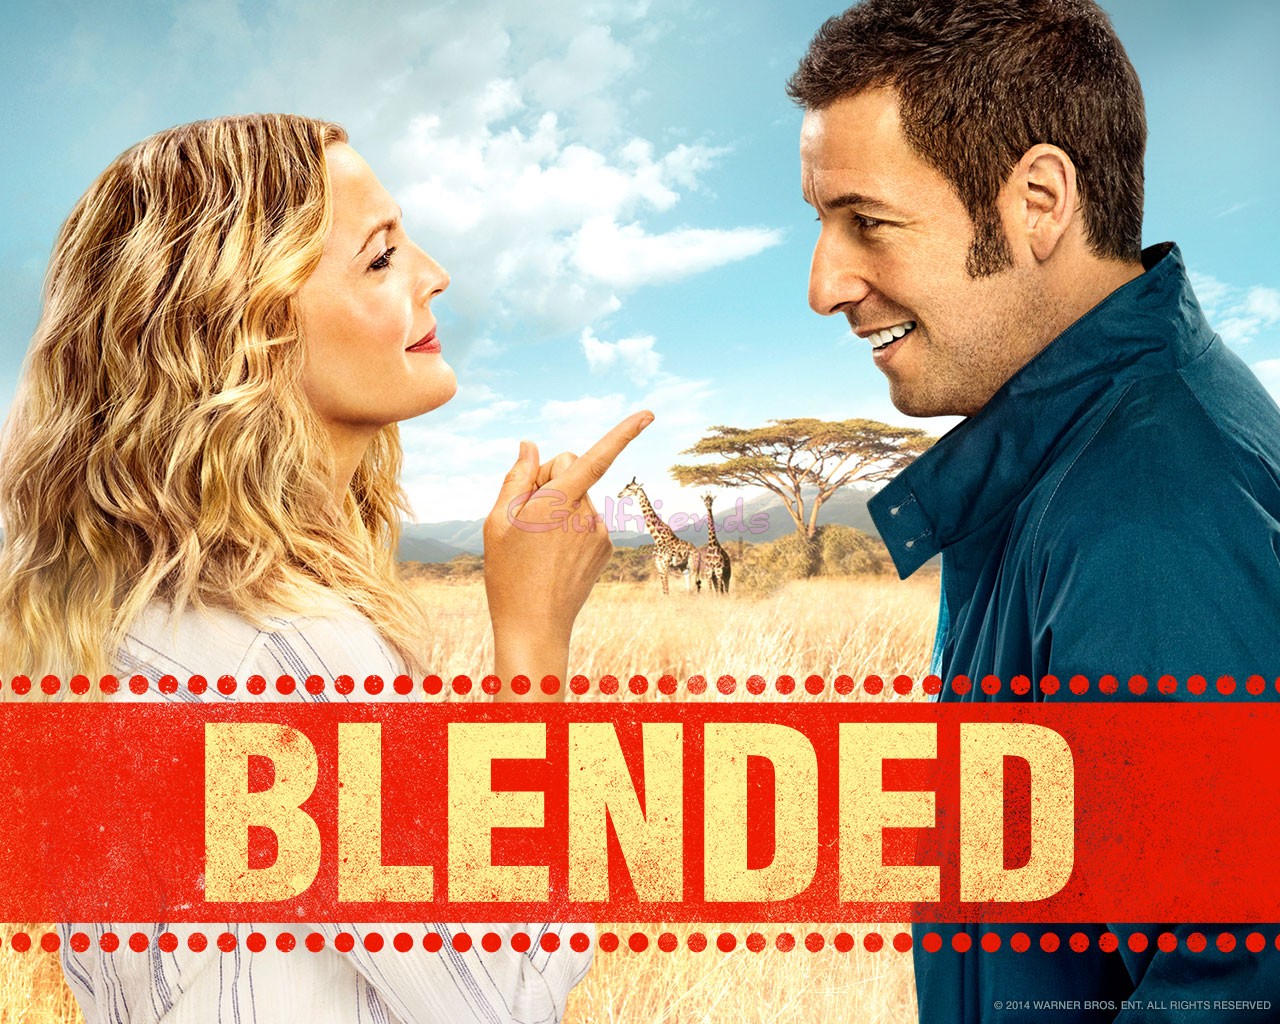 Blended – Movie Review of The New Comedy #BlendedMovie Should You Go & See It?